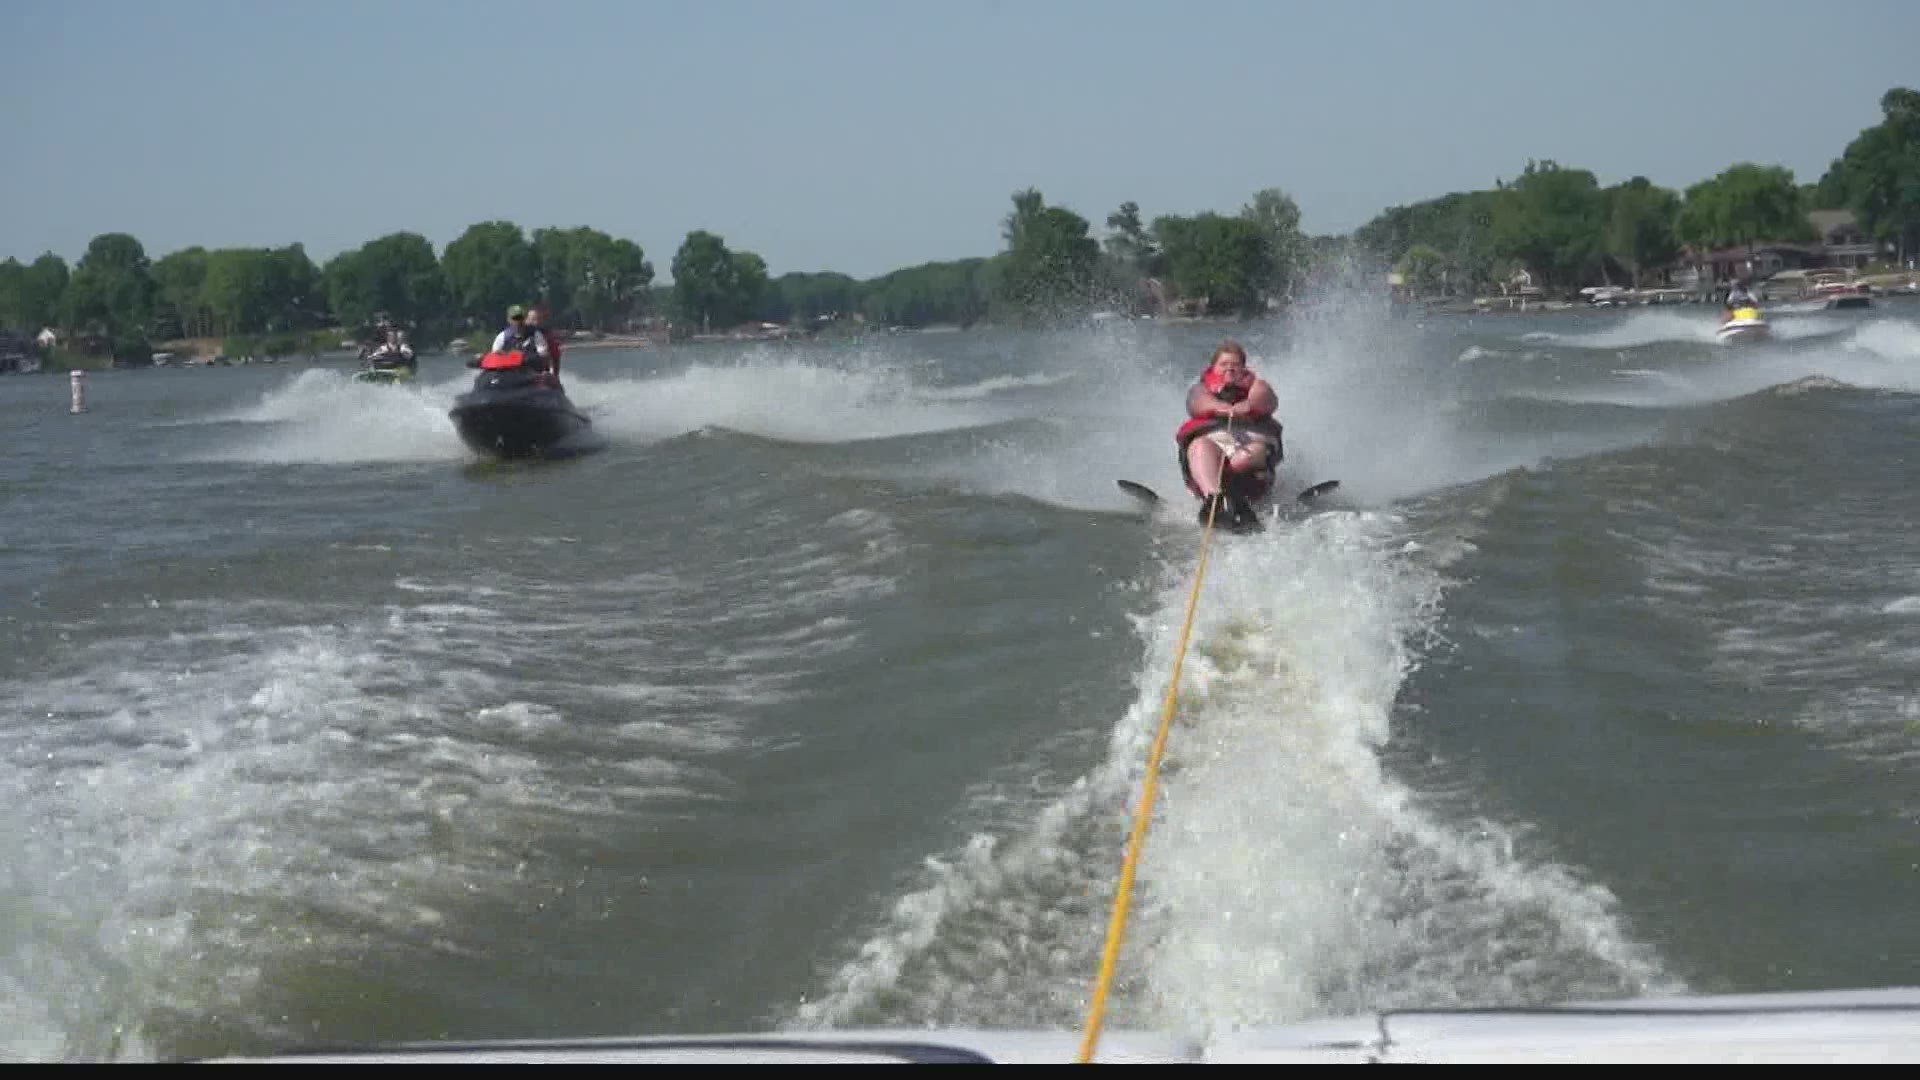 RHI is reaching out to veterans with programs including adaptive water skiing.